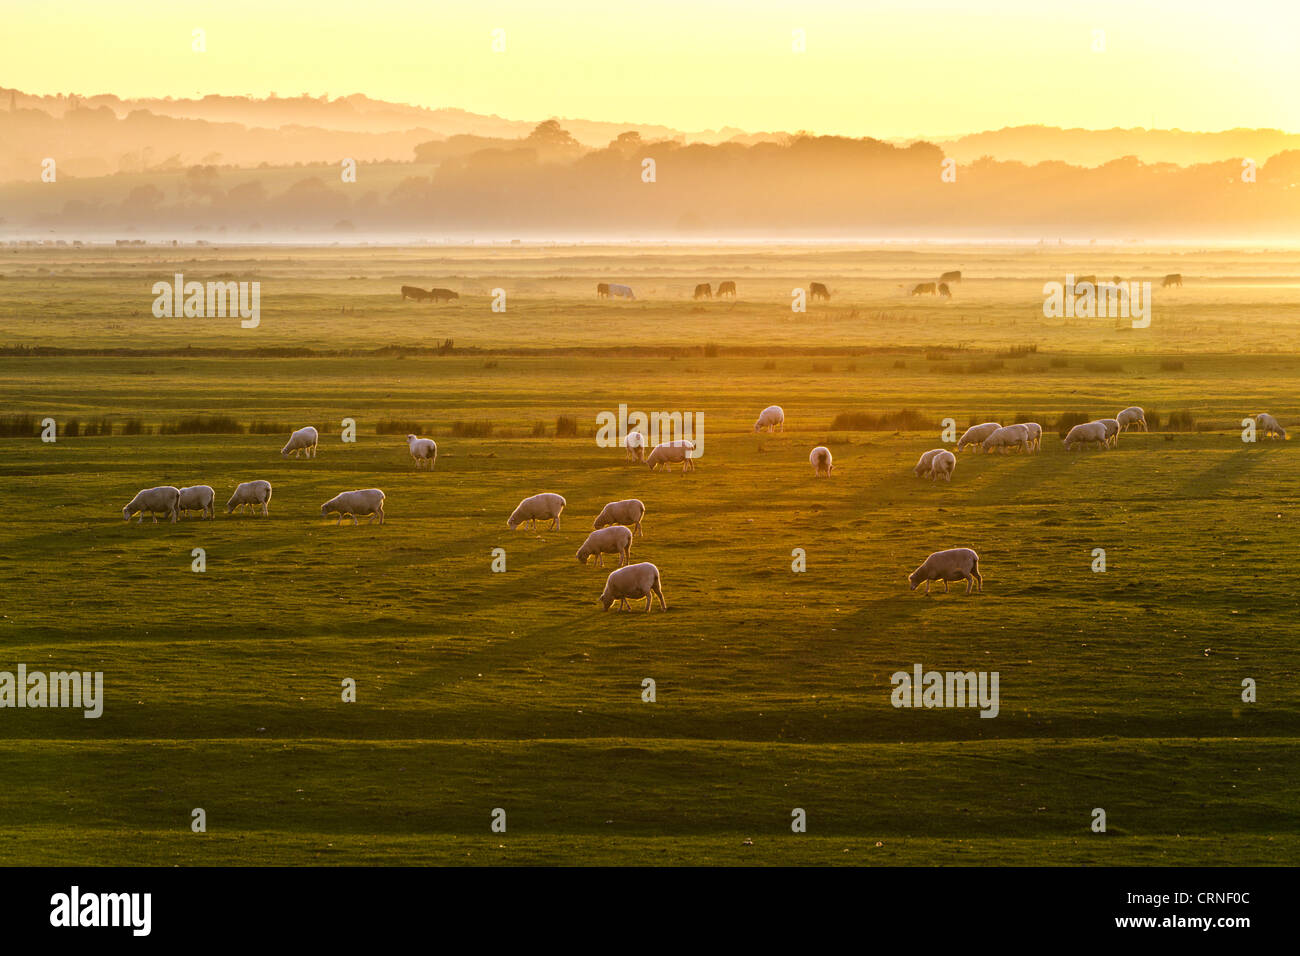 Sheep grazing in fields at sunset. Stock Photo